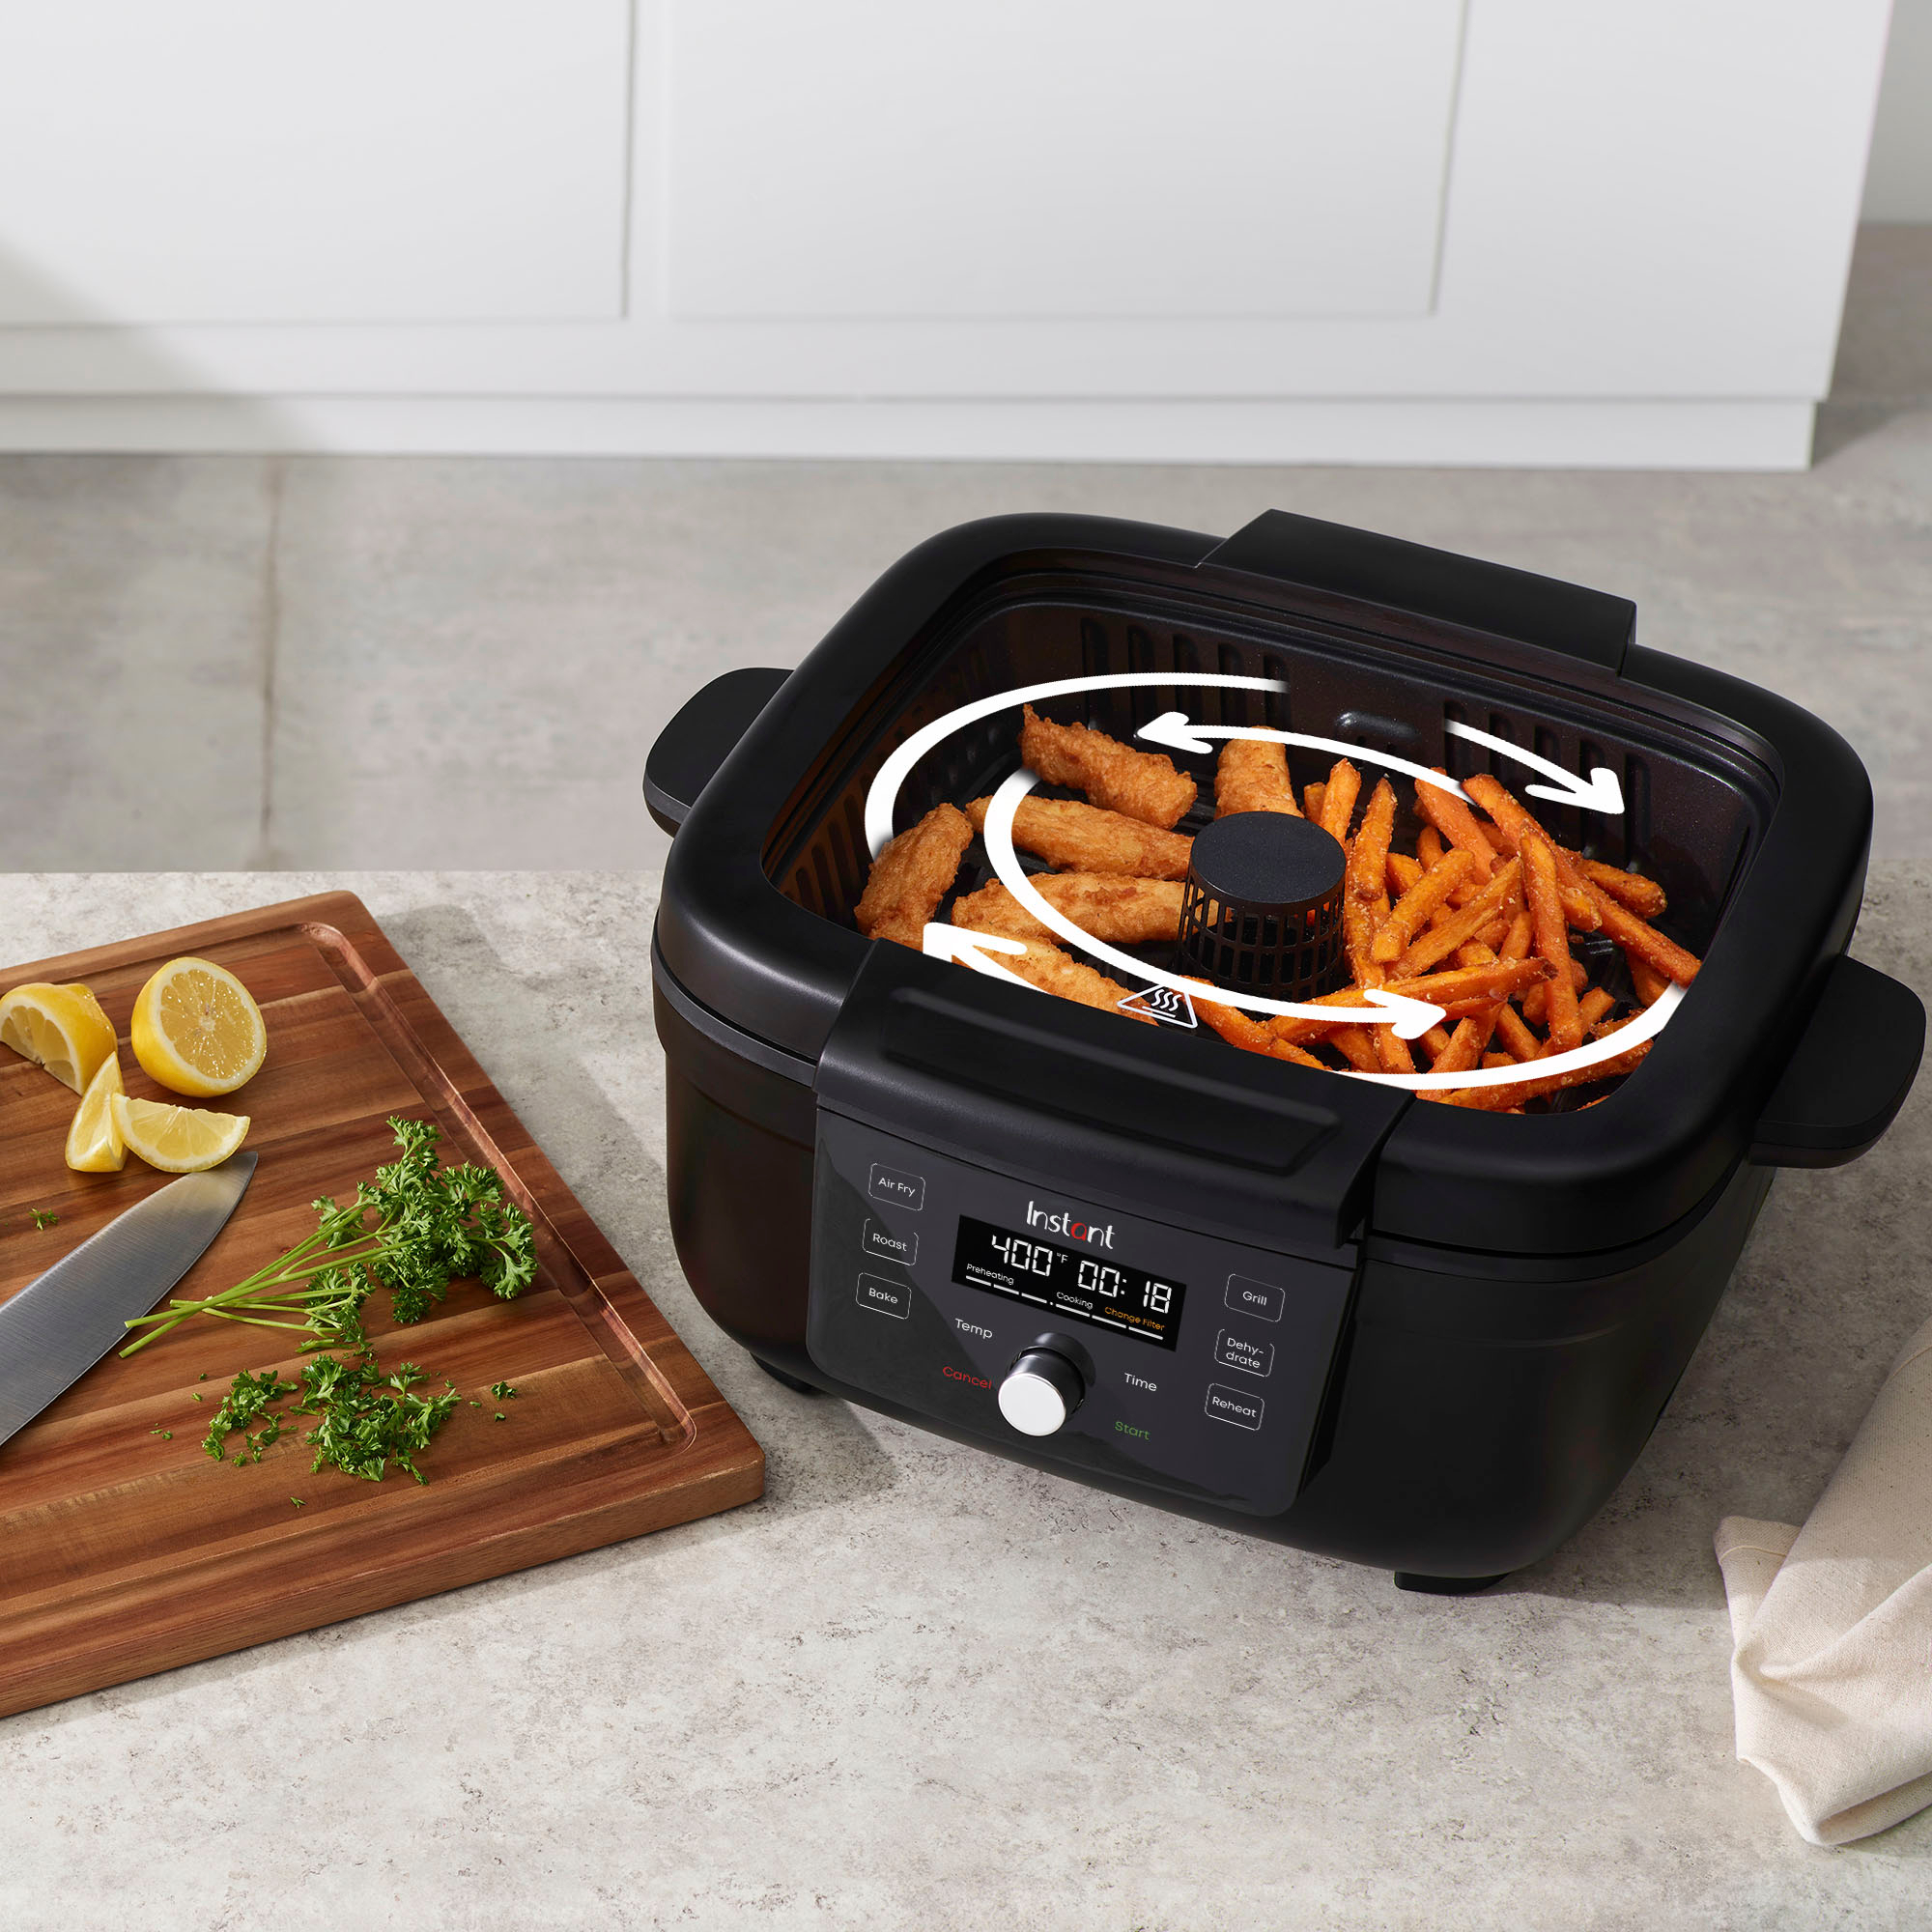 7 In 1 Smokeless Electric Indoor Grill with Air Fry, Roast, Bake, Portable  2 in 1 Indoor Tabletop Grill & Griddle with Preset Function, Removable  Non-Stick Plate, Air Fryer Basket, 6-Serving 